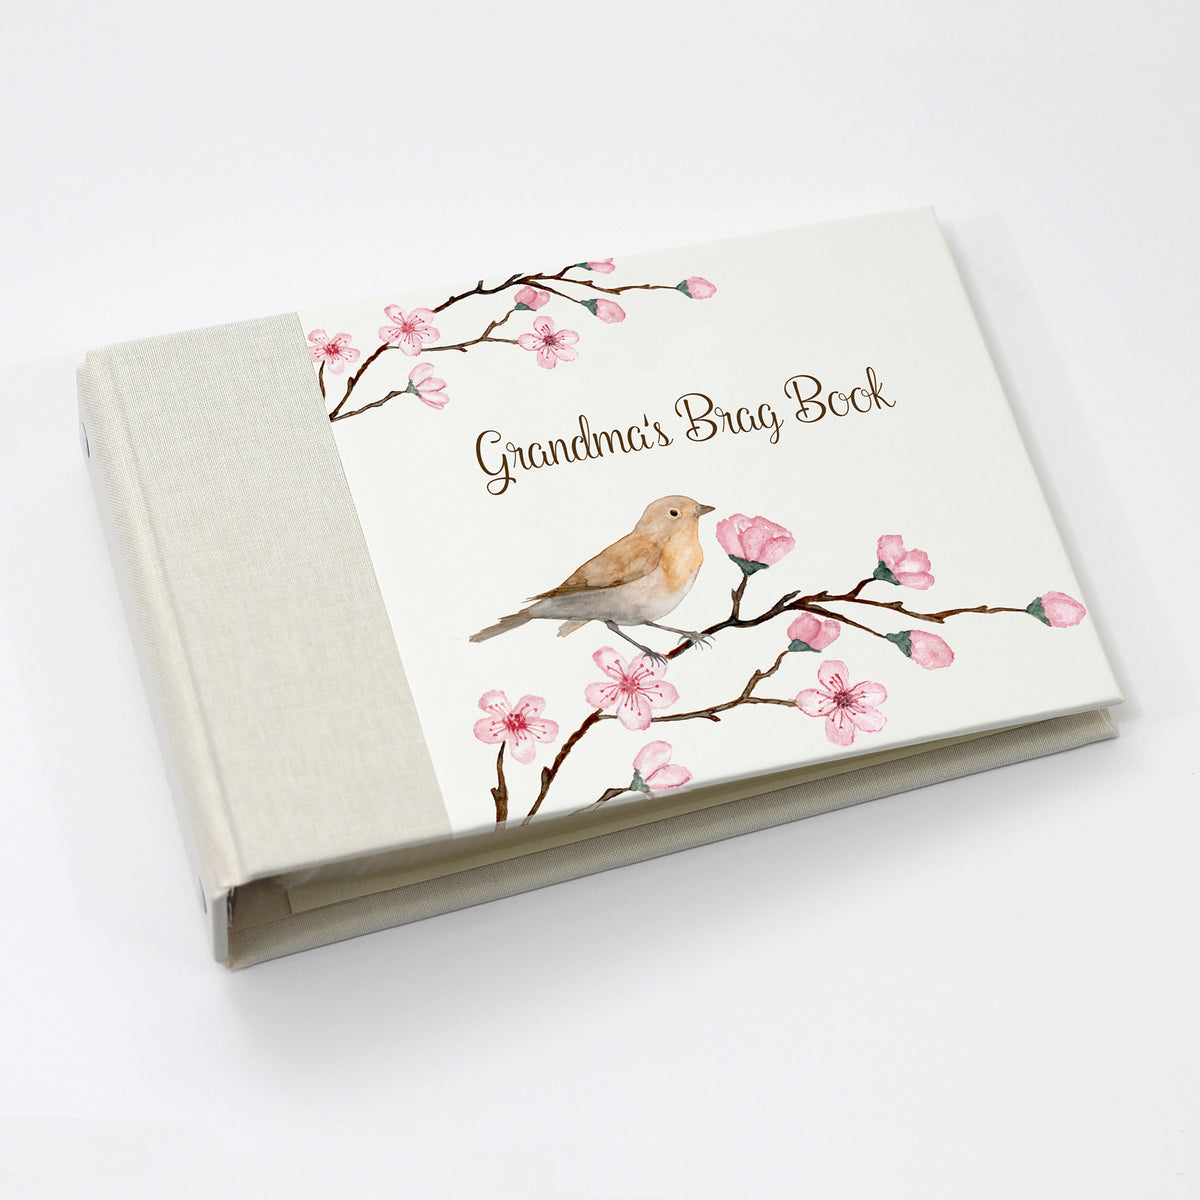 Grandma&#39;s Brag Book | Printed Cover: Cherry Bird | Available Personalized